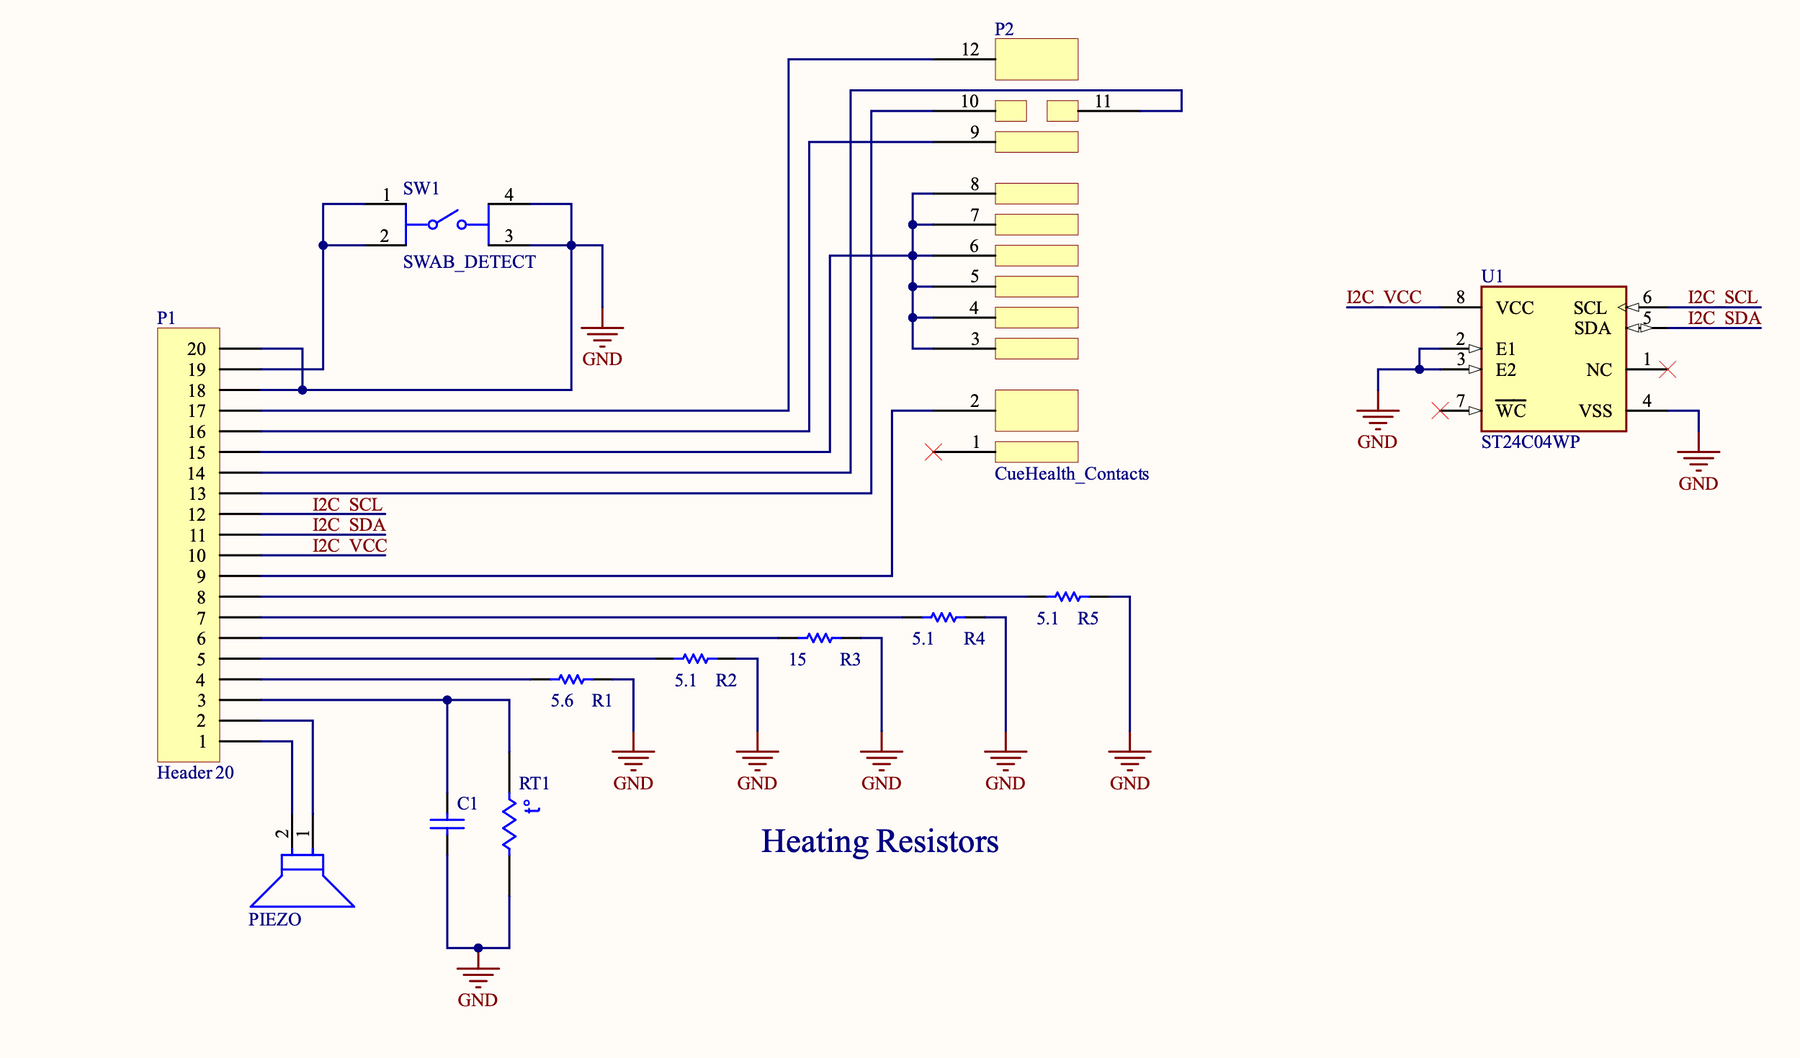 Electrical schematic of the cartridge